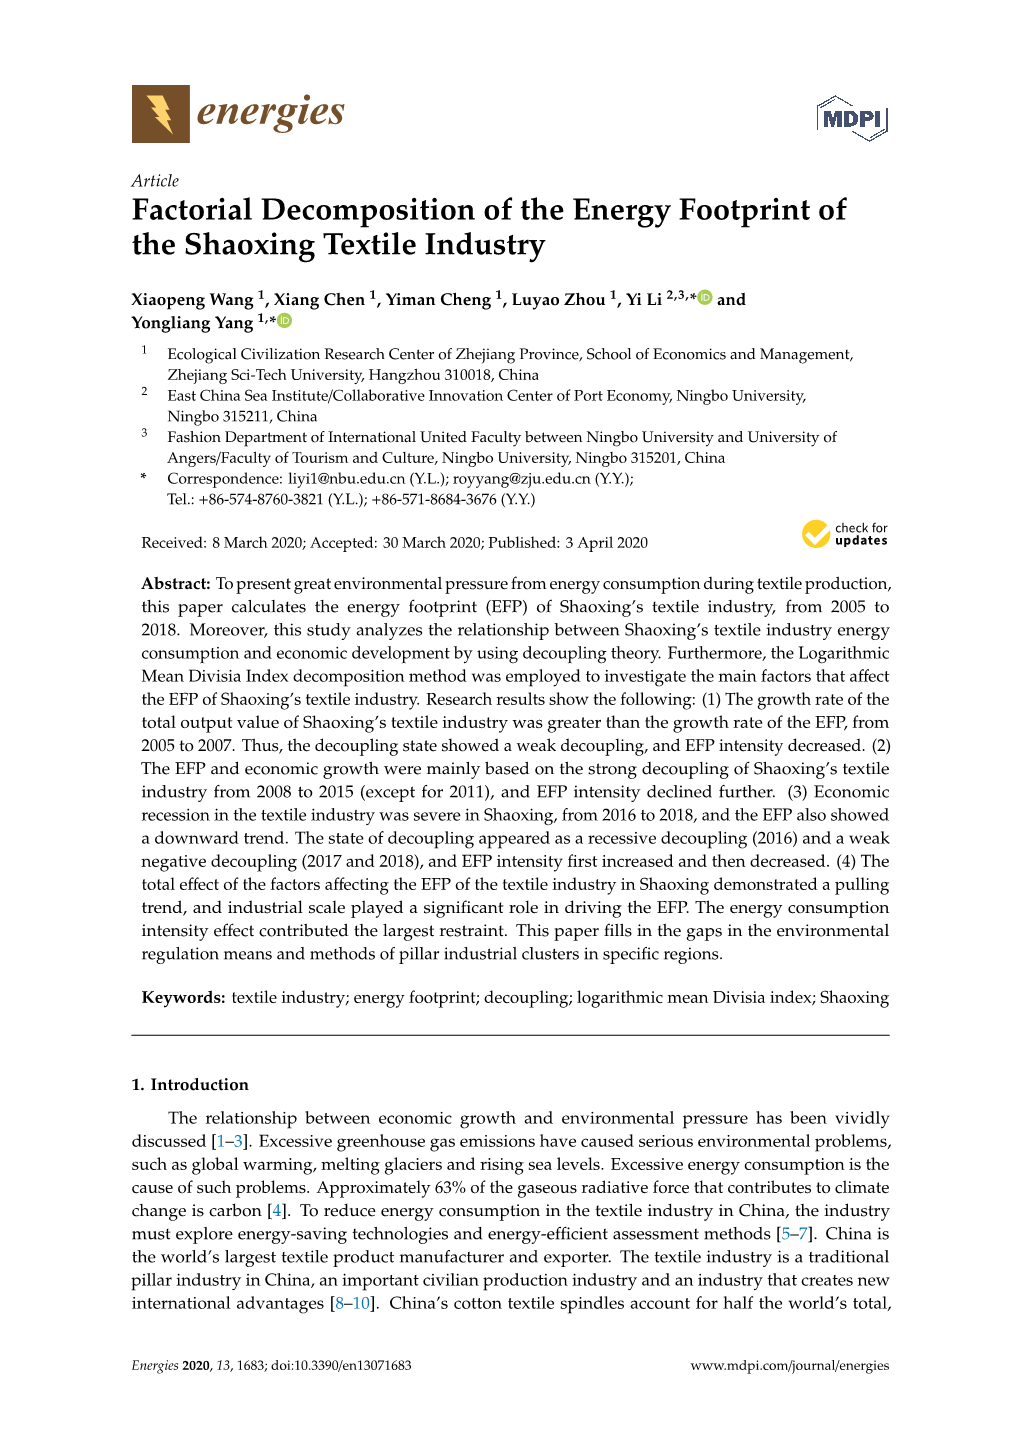 Factorial Decomposition of the Energy Footprint of the Shaoxing Textile Industry